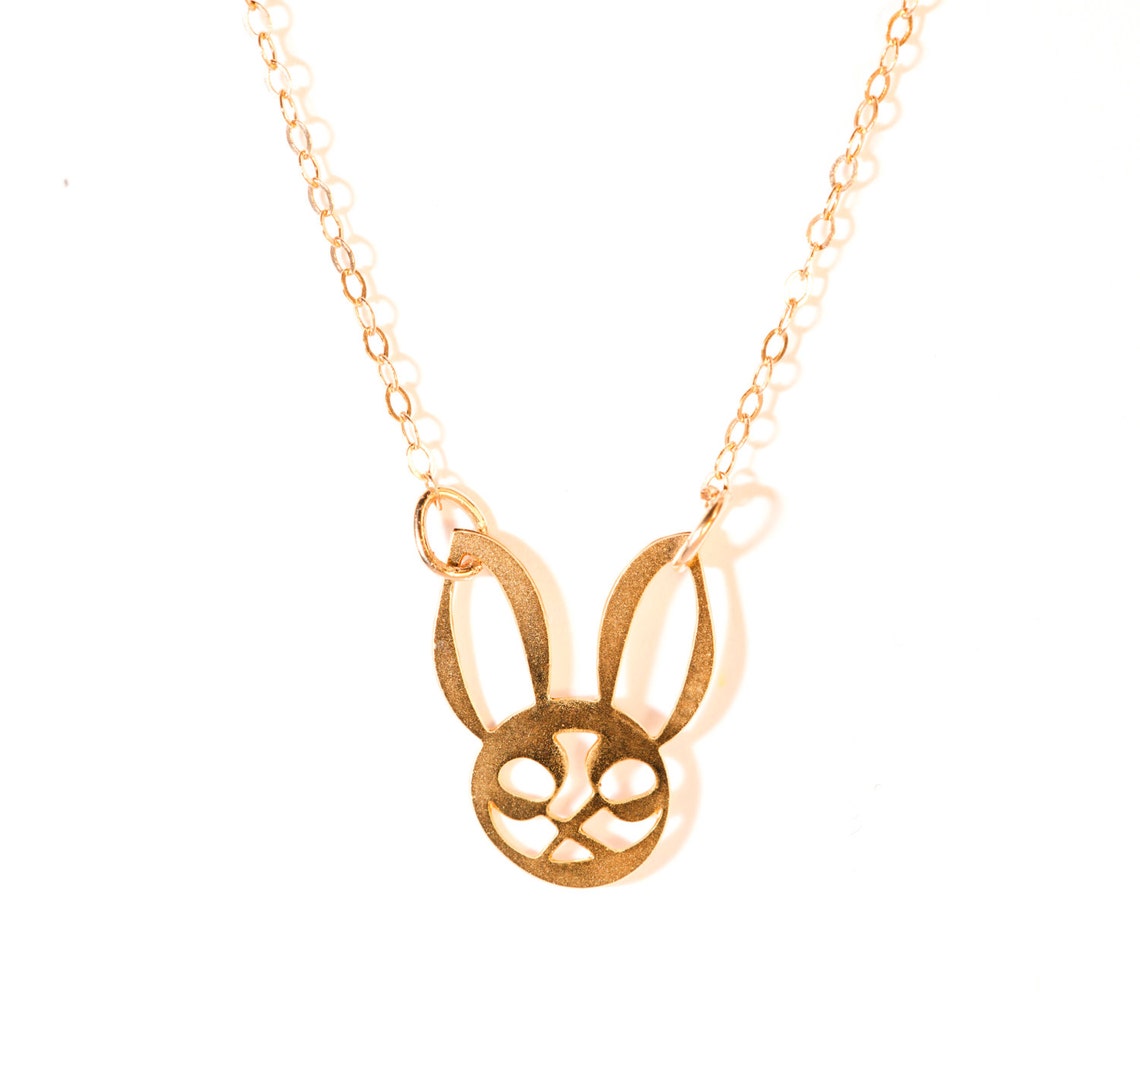 Bunny Charm Necklace Gold Filled Necklace Pet Bunny Icon Jewelry Design ...